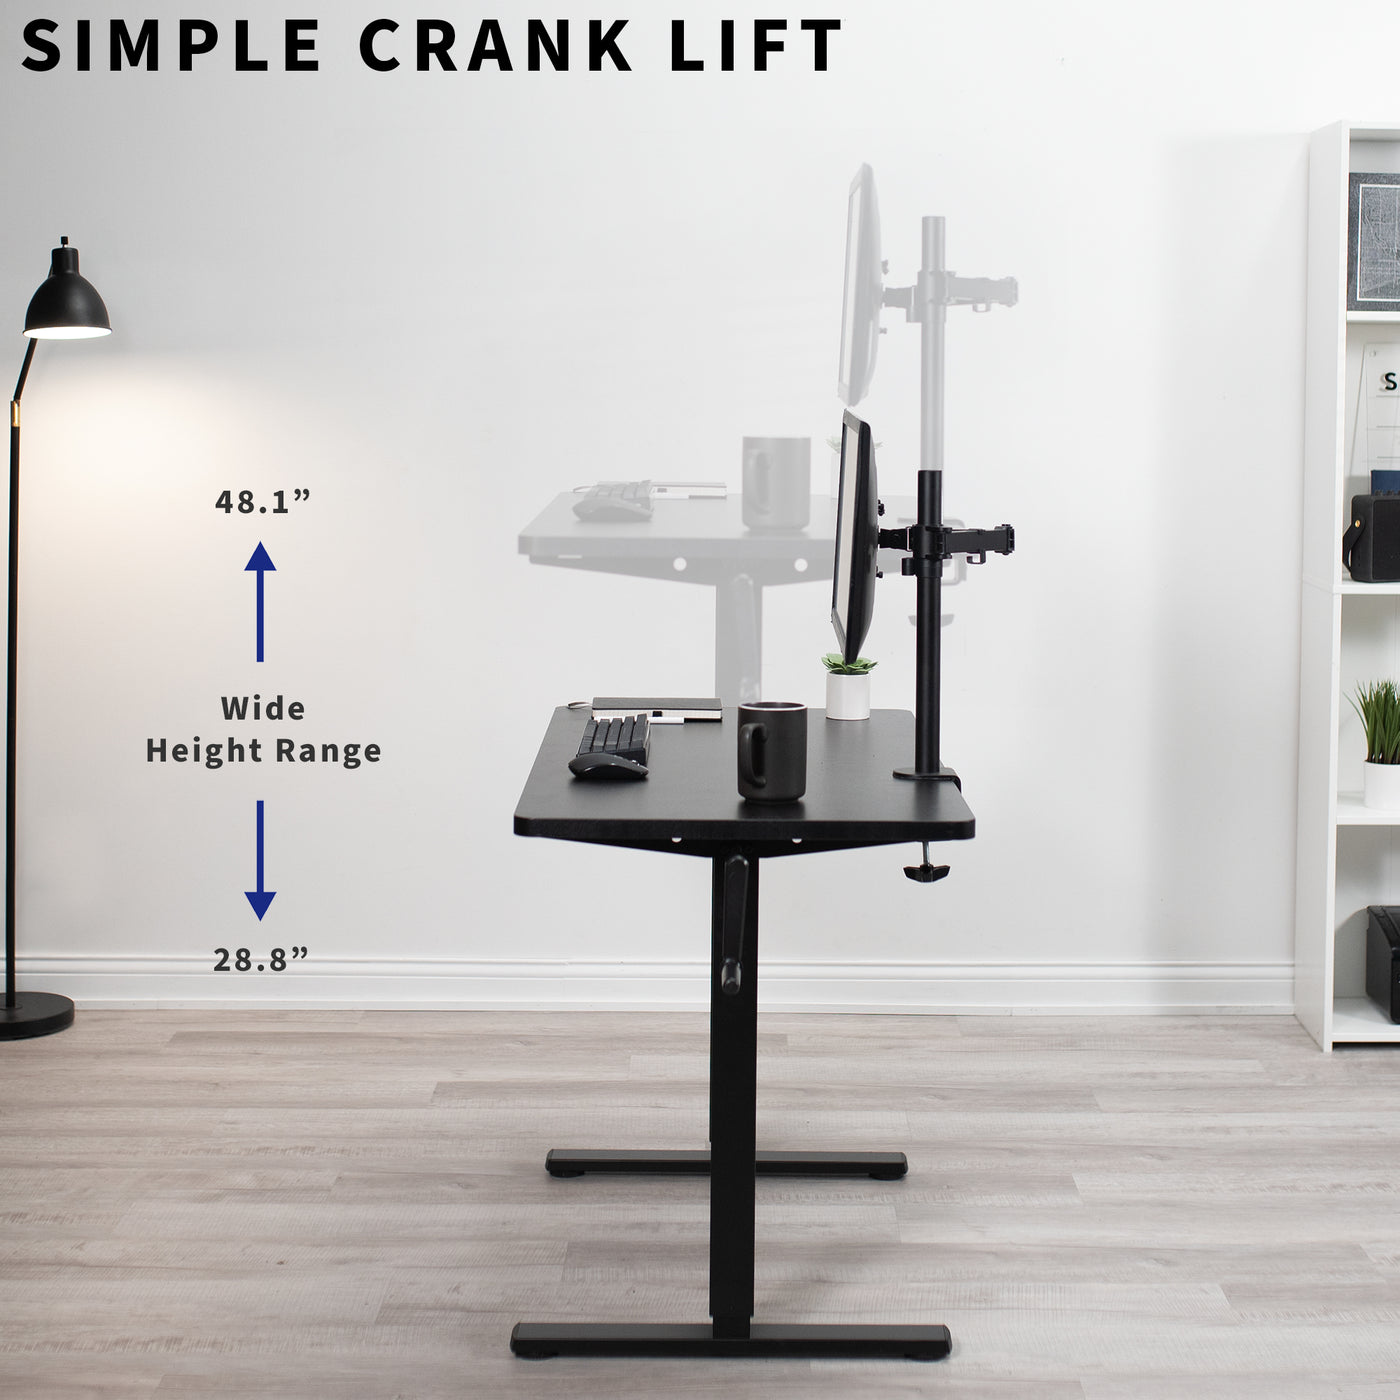 Simple and easy-to-use crank lift featured on the side of the desk.